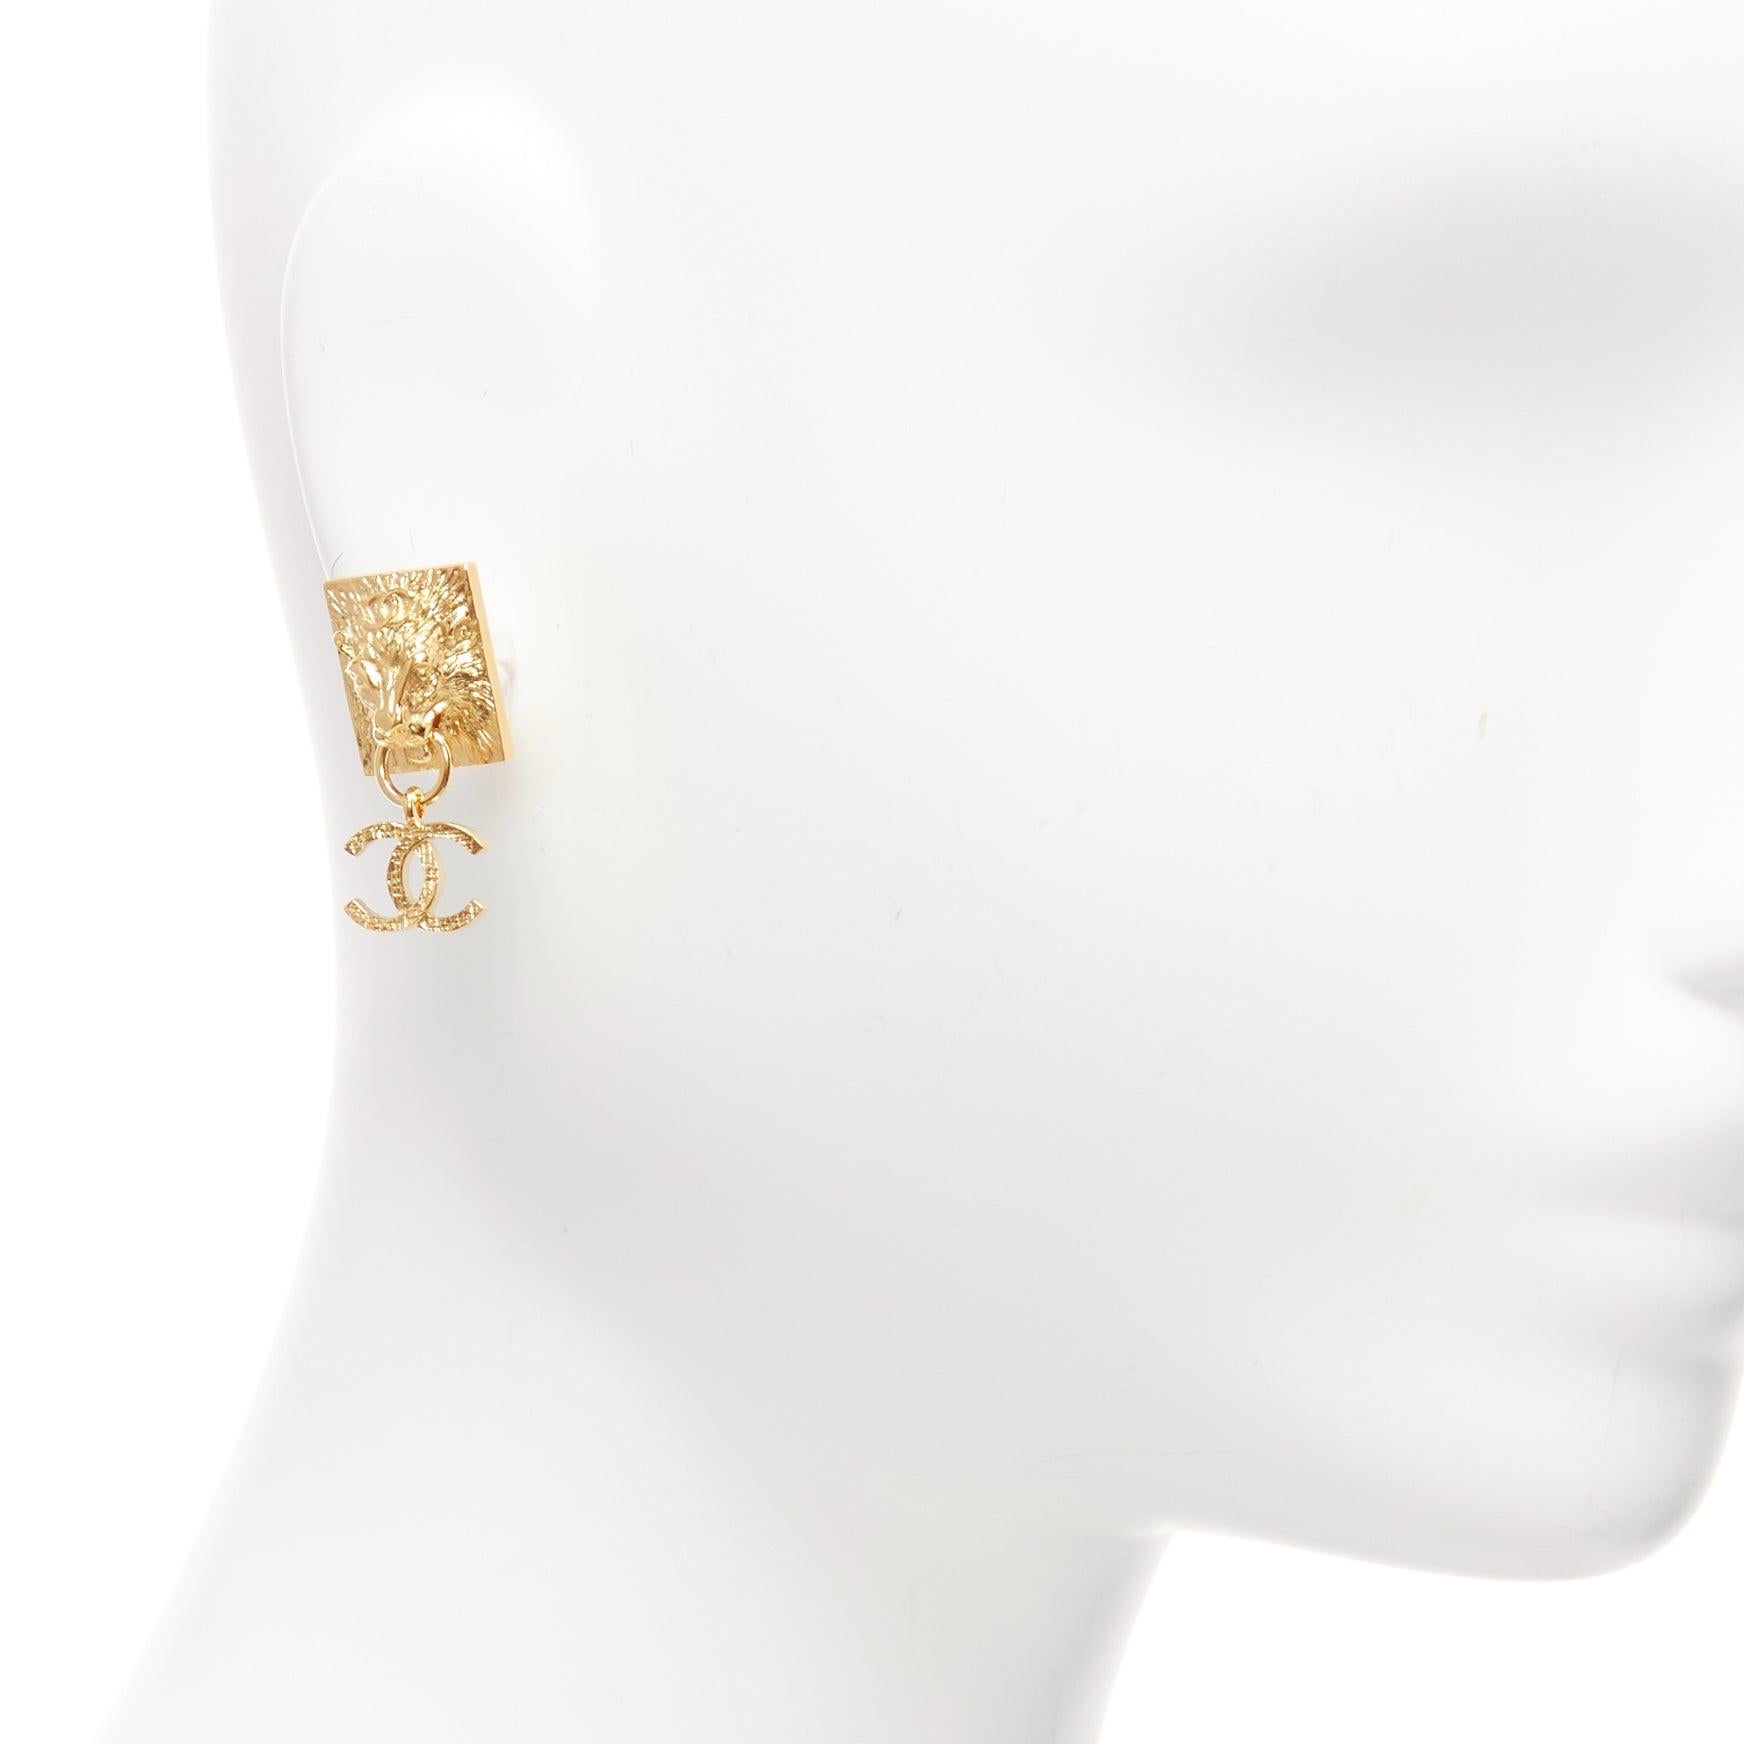 CHANEL G22A gold CC charm Lion Head square stud clip on earrings pair
Reference: AAWC/A00900
Brand: Chanel
Designer: Virginie Viard
Collection: G22A
Material: Metal
Color: Gold
Pattern: Solid
Closure: Clip On
Lining: Gold Metal
Extra Details: From